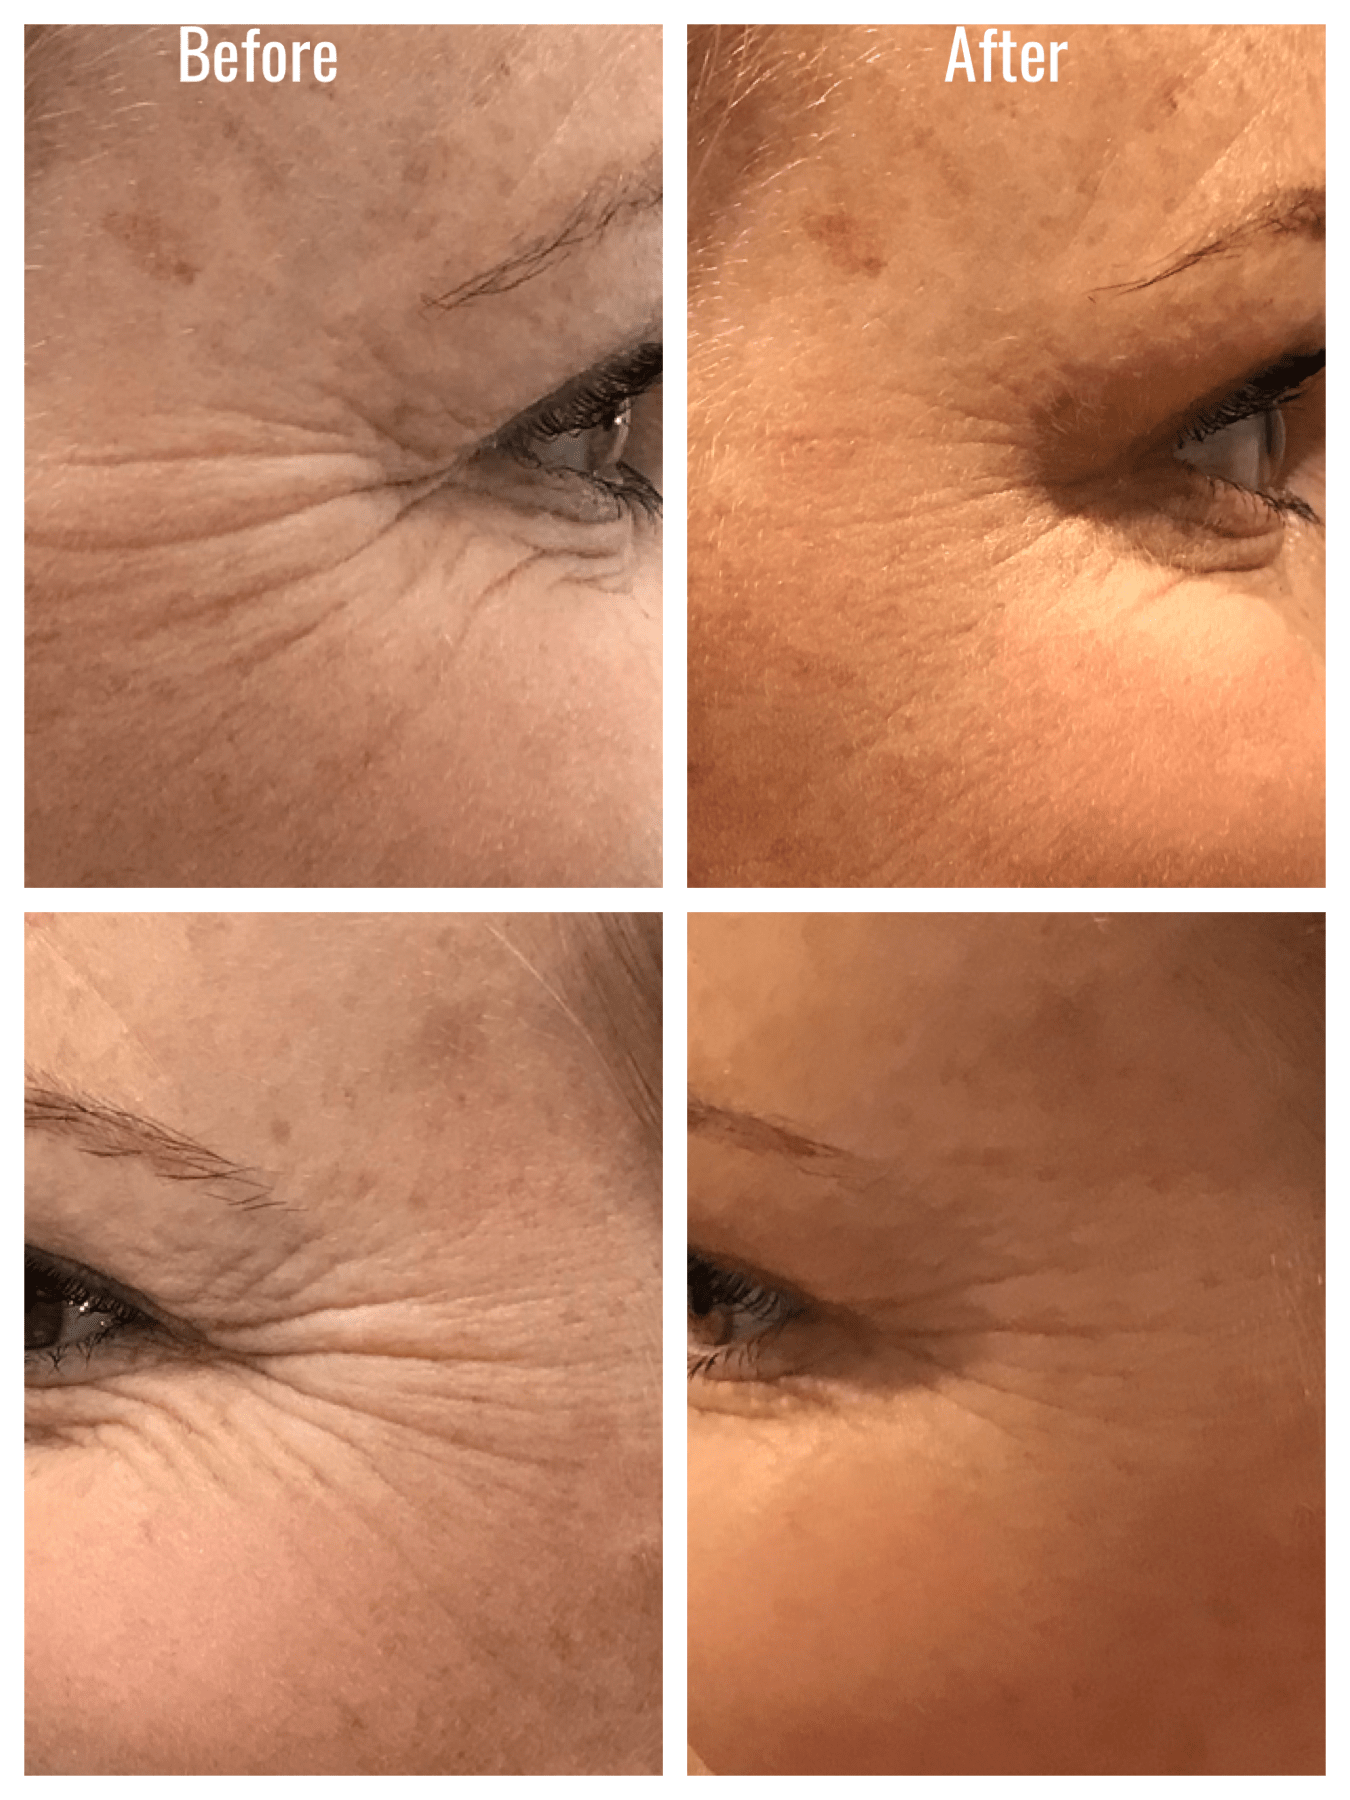 Botox, before after botox injection treatment wrinkles, anti aging, facial lines forehead eyebrow lift